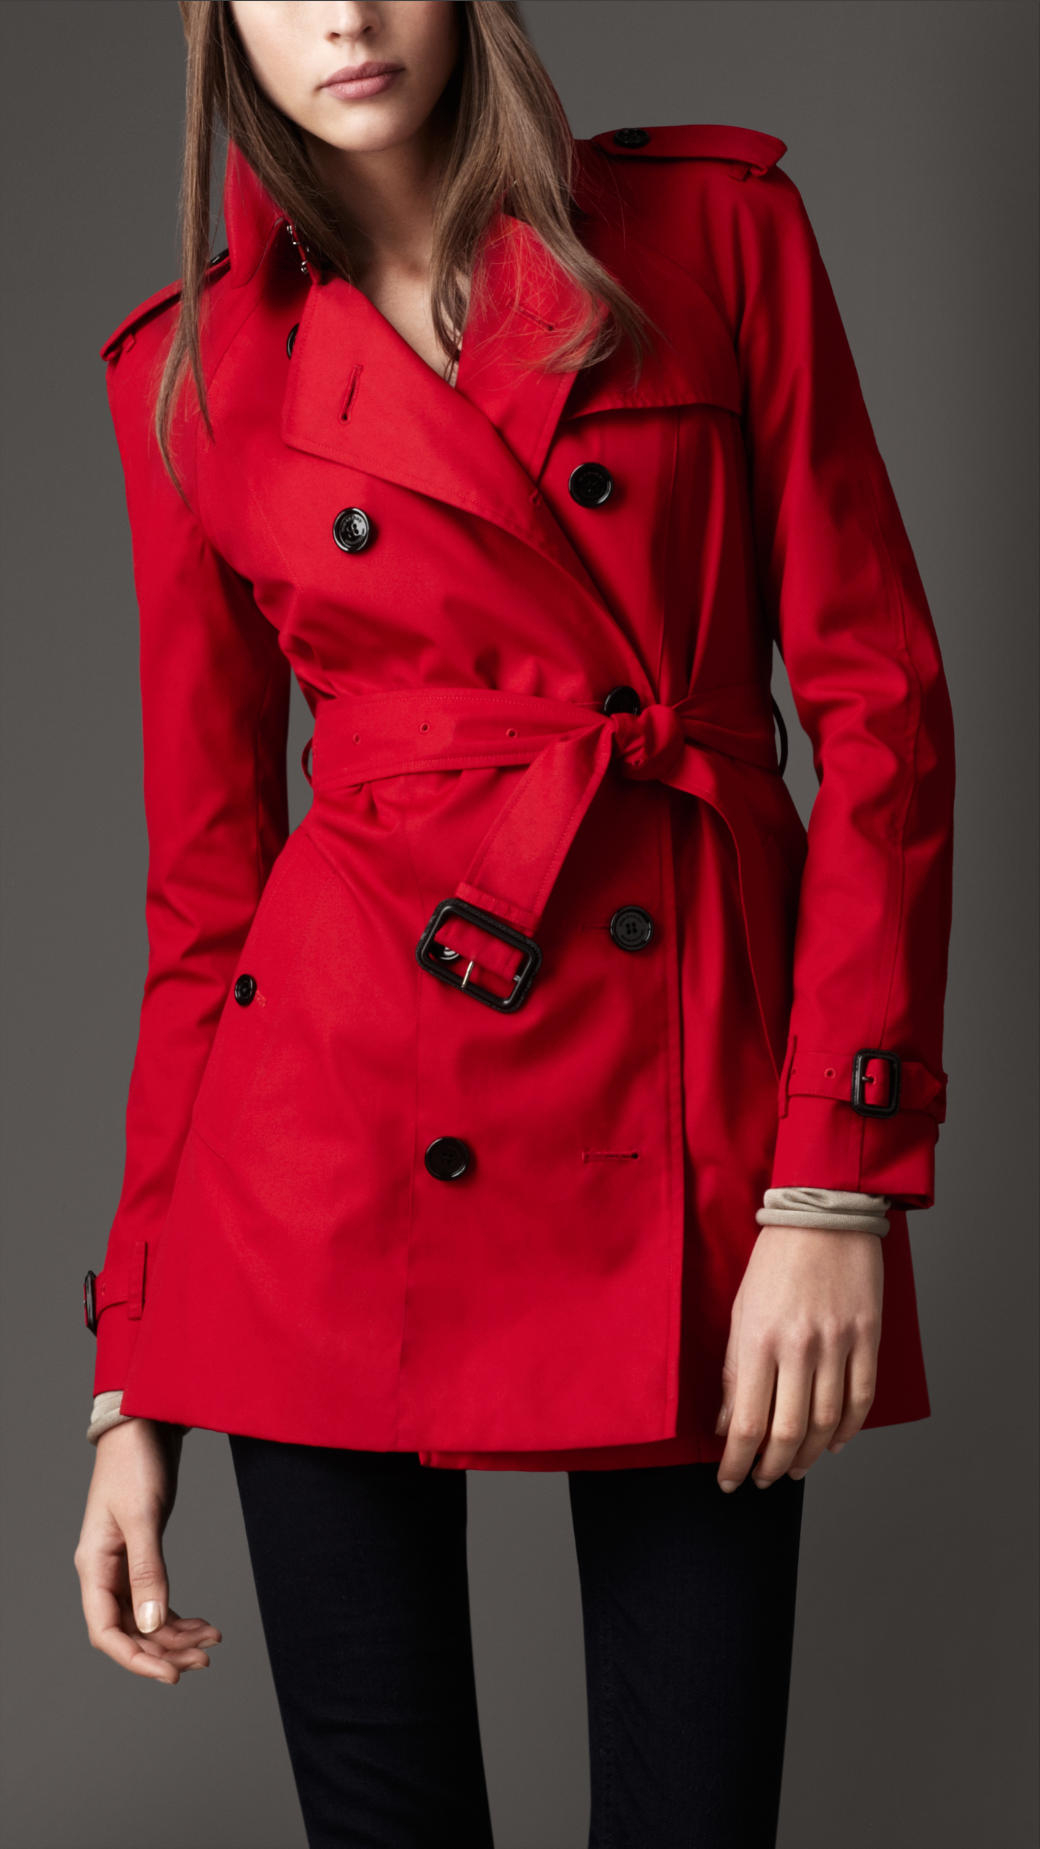 Lyst - Burberry Short Cotton Blend Heritage Trench Coat in Red